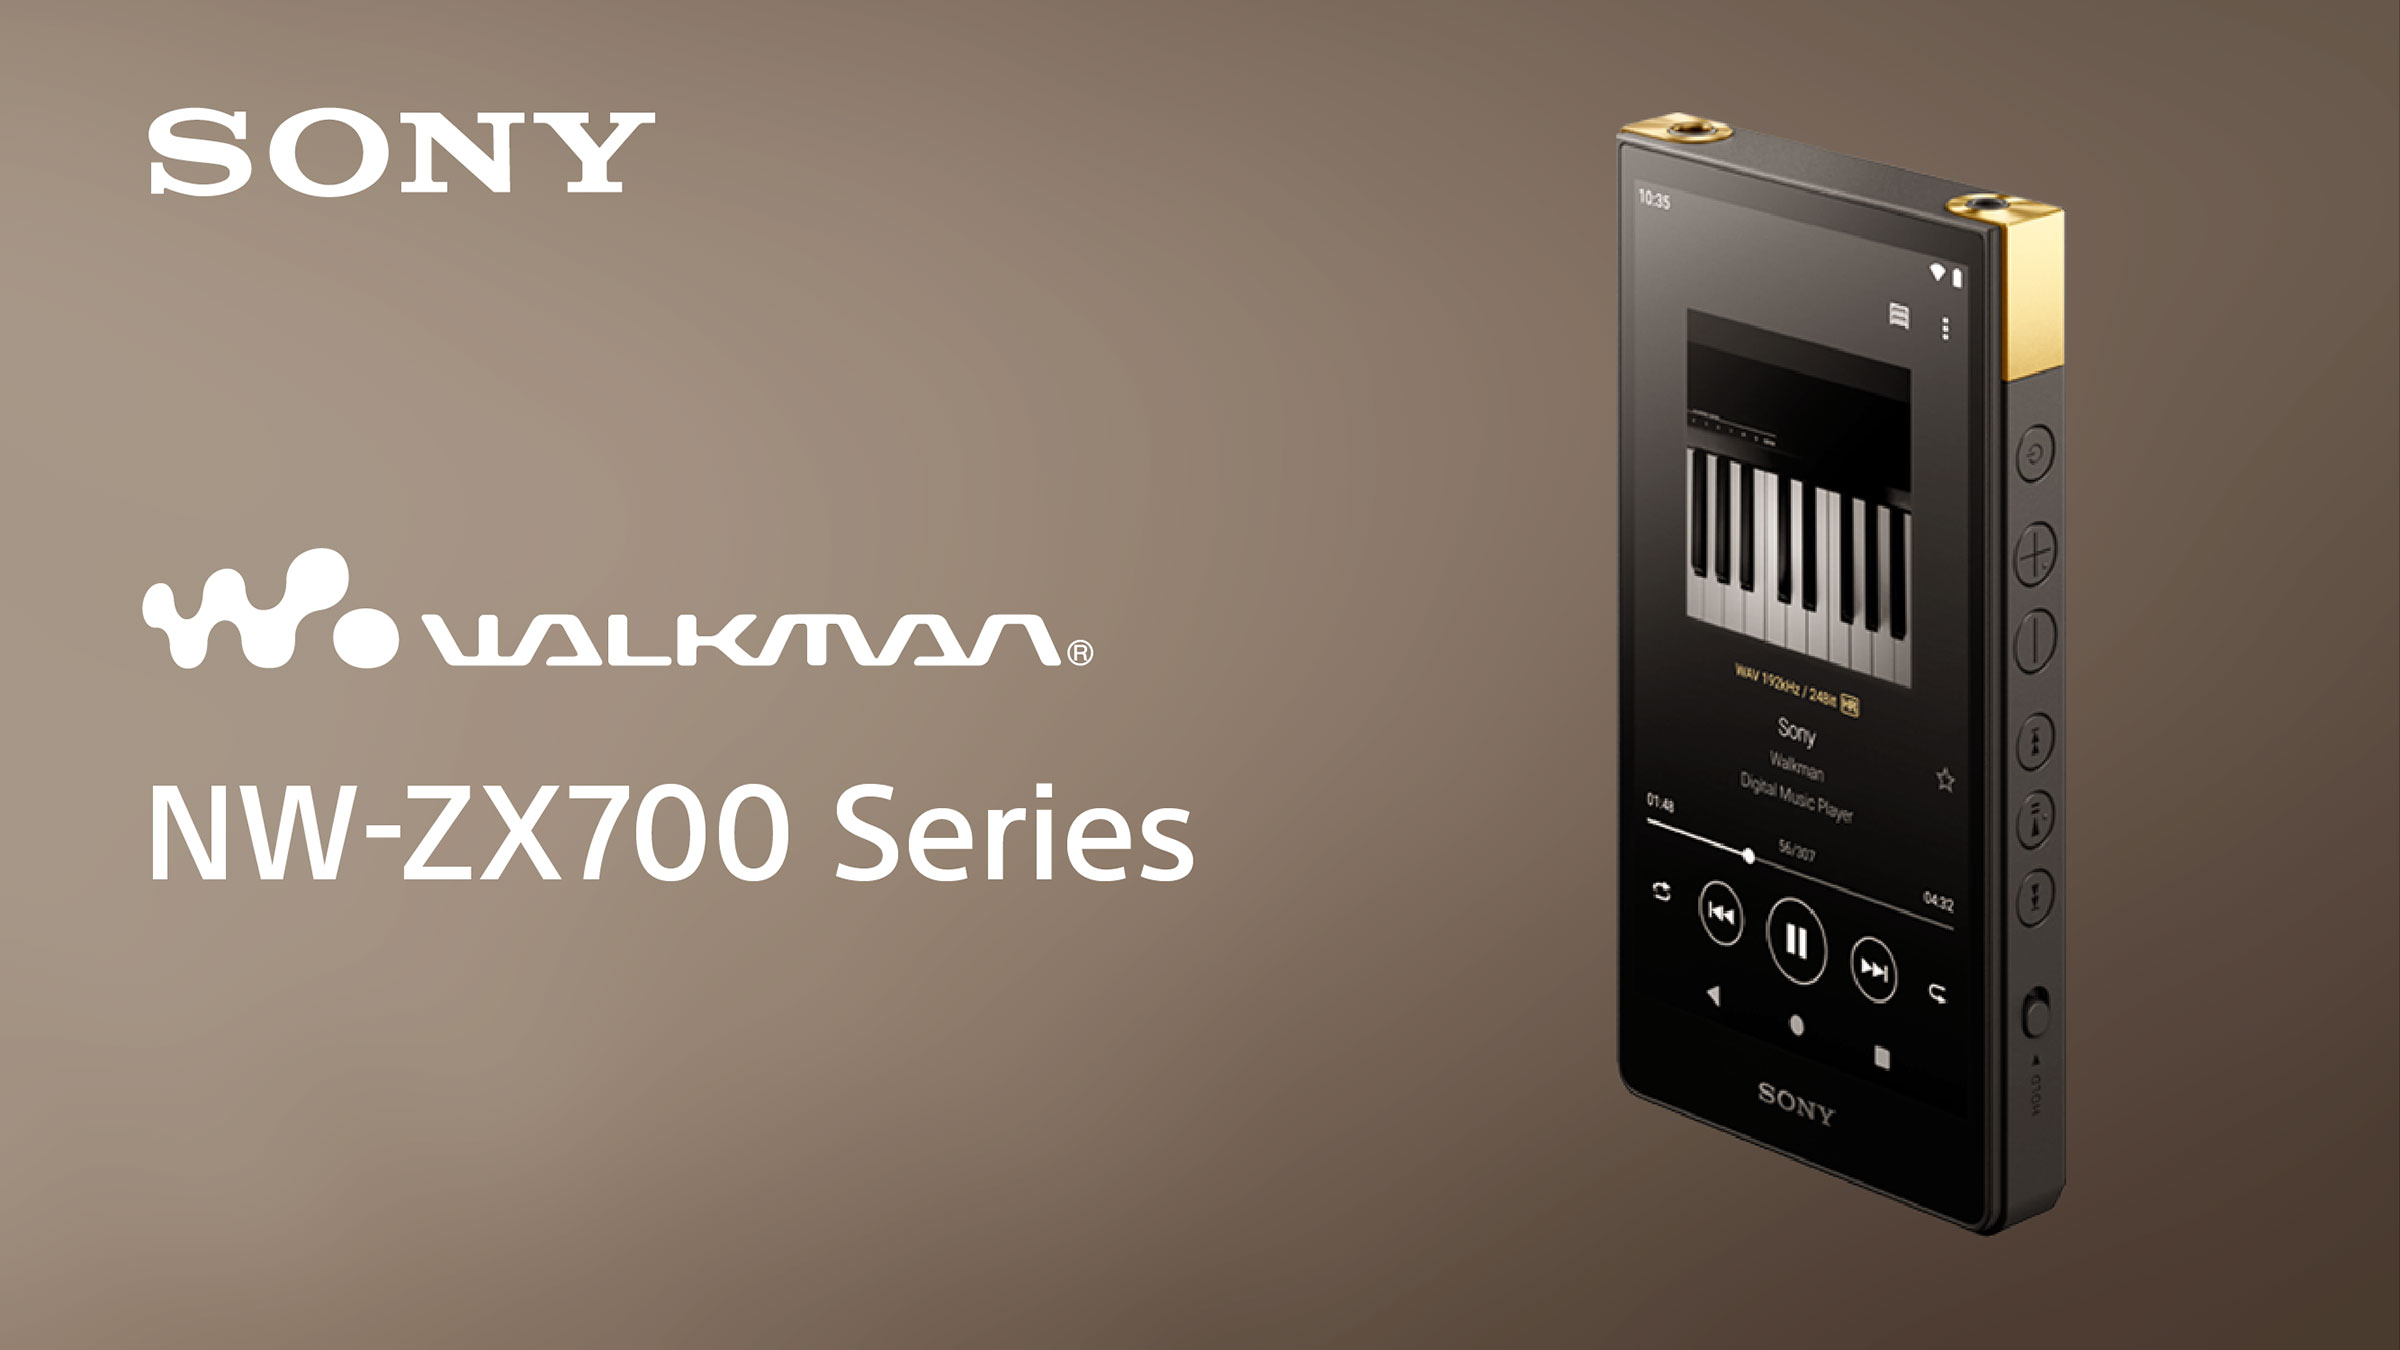 Sony NW-ZX707 Walkman with Hi-Res Audio launched in India